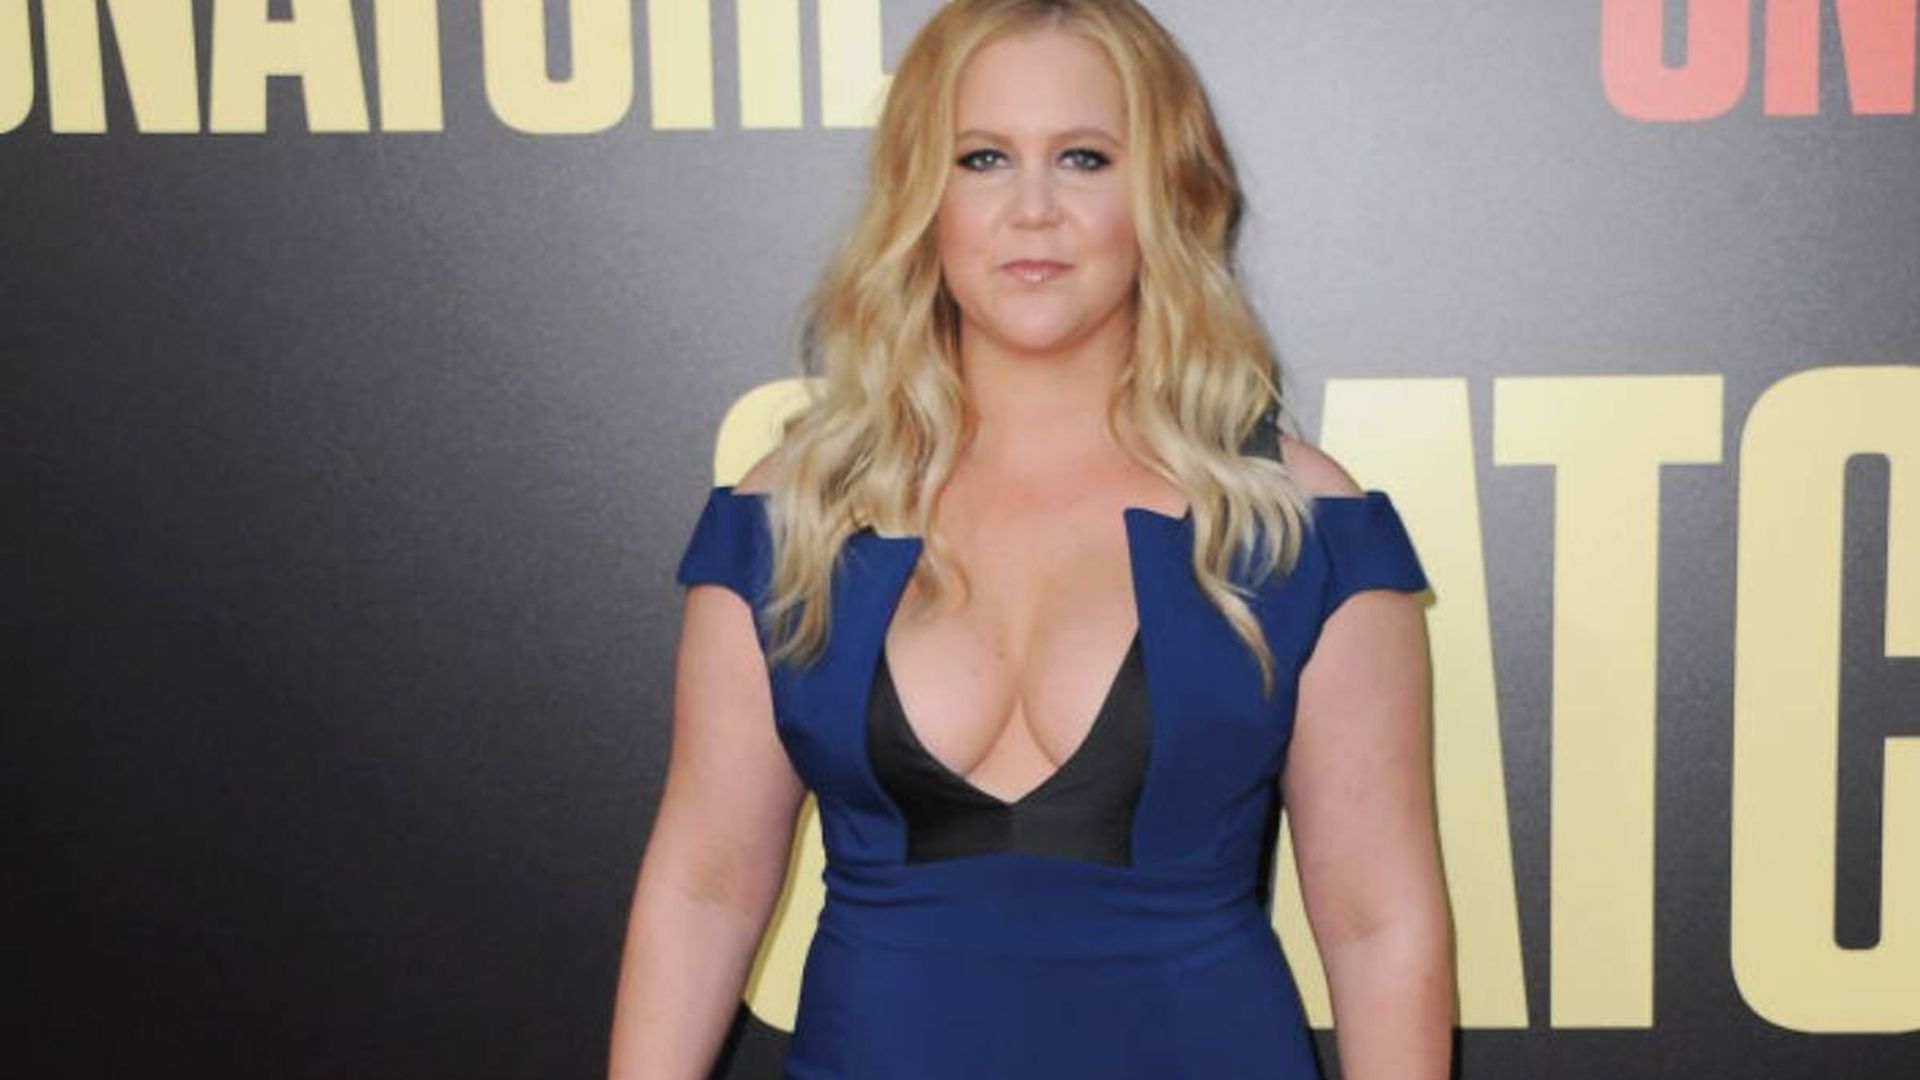 Amy Schumer posts bikini day photo - but it's not what you think